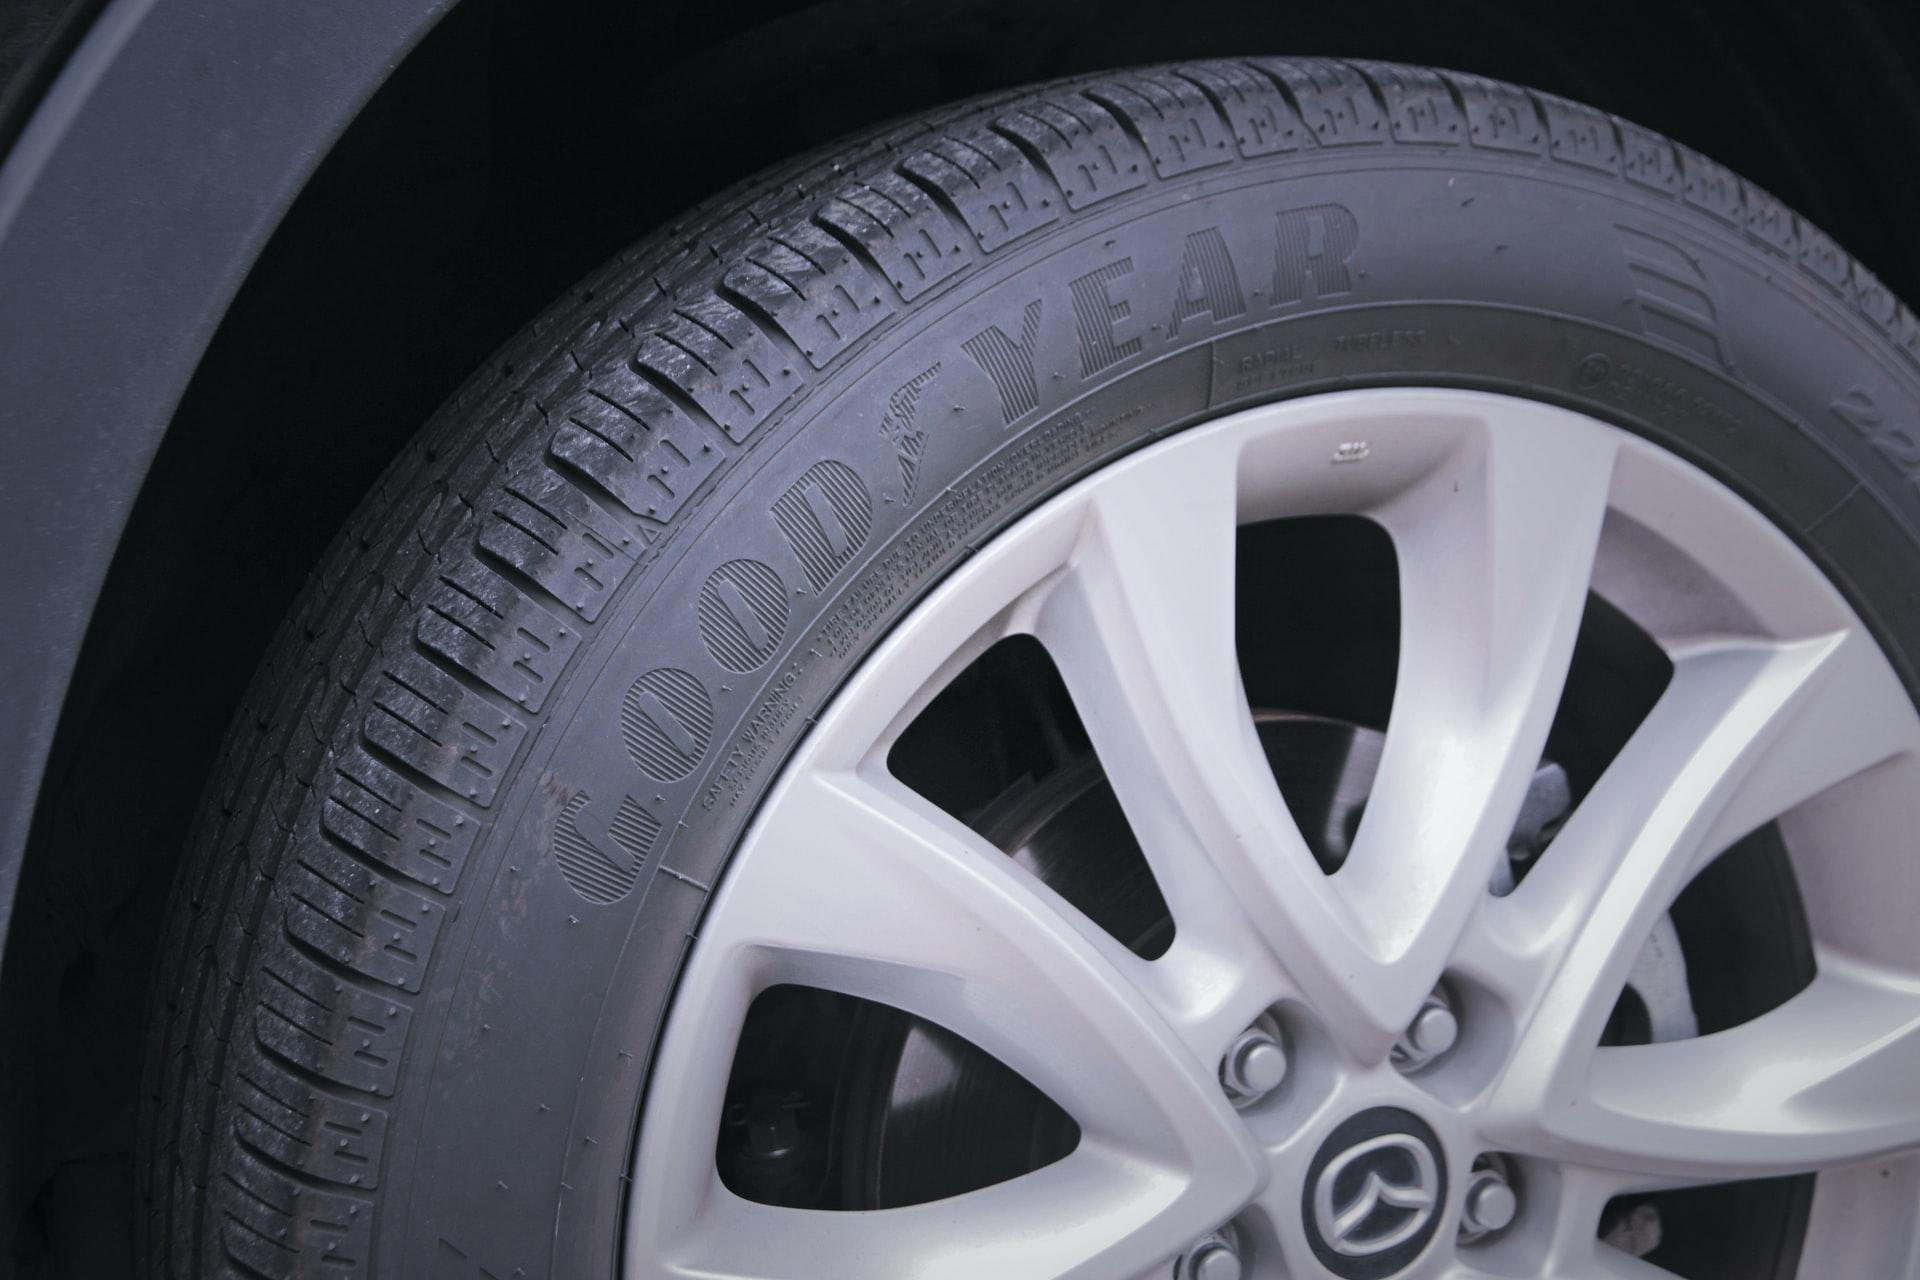 Goodyear and Pirelli both consistently produce reliable tires.